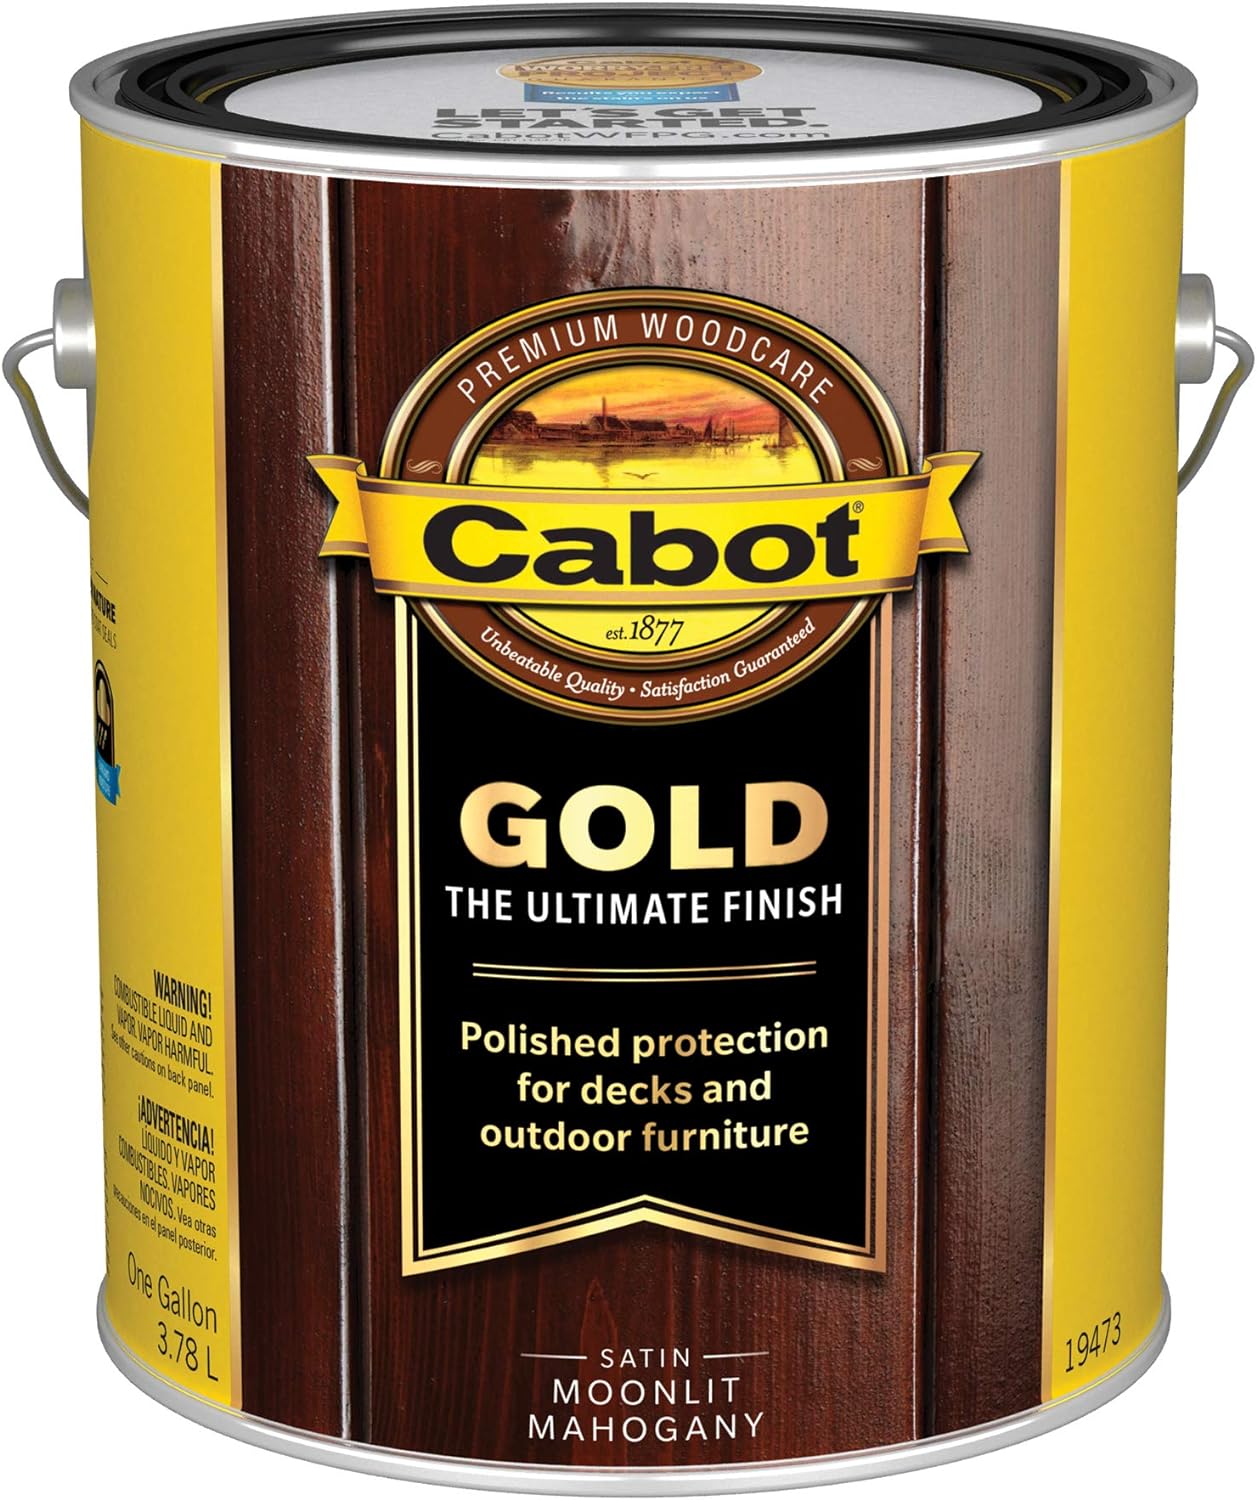 Cabot Gold Finish Stain